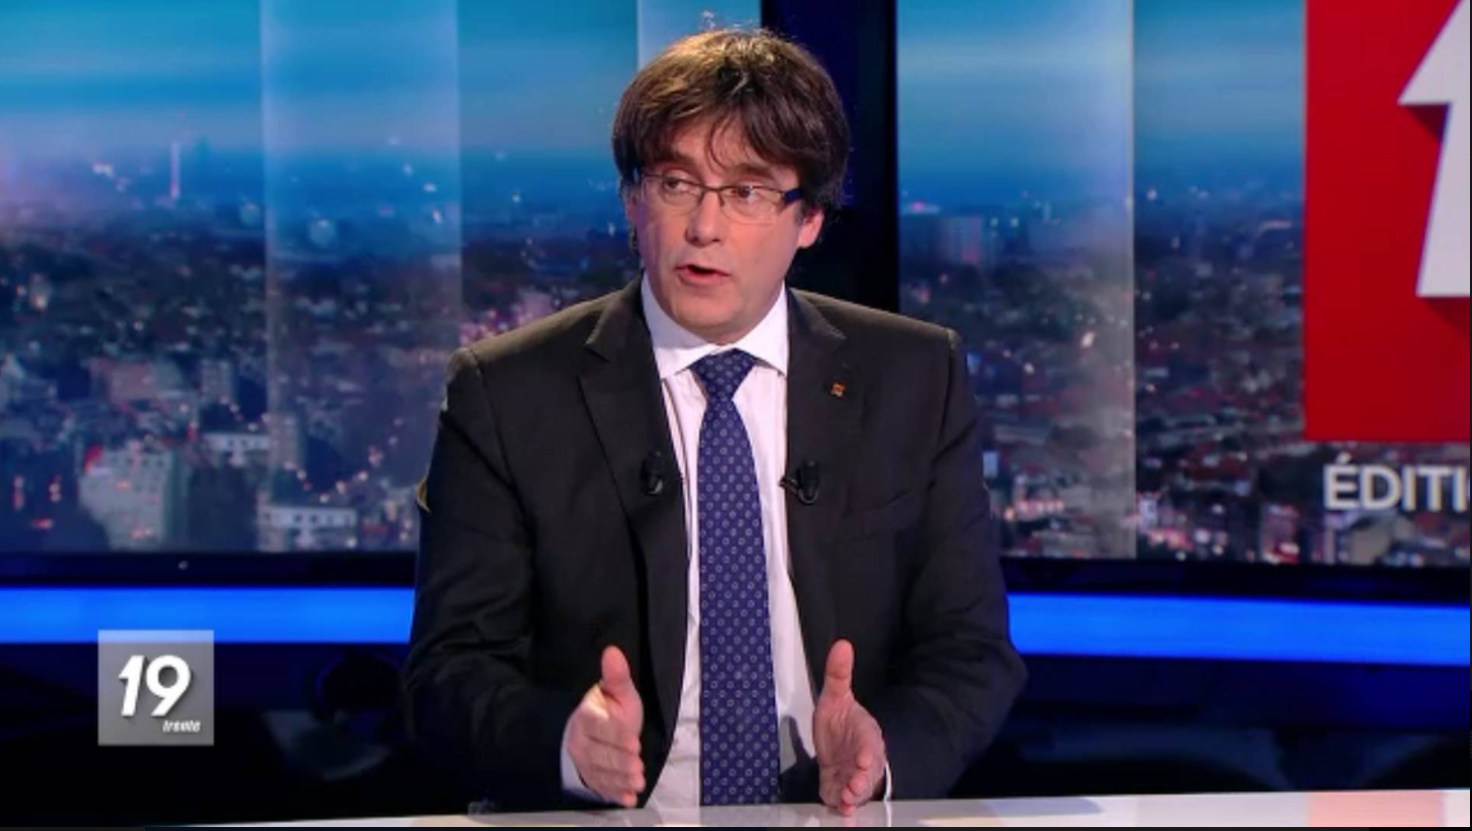 Puigdemont: "I'm willing to be a candidate"